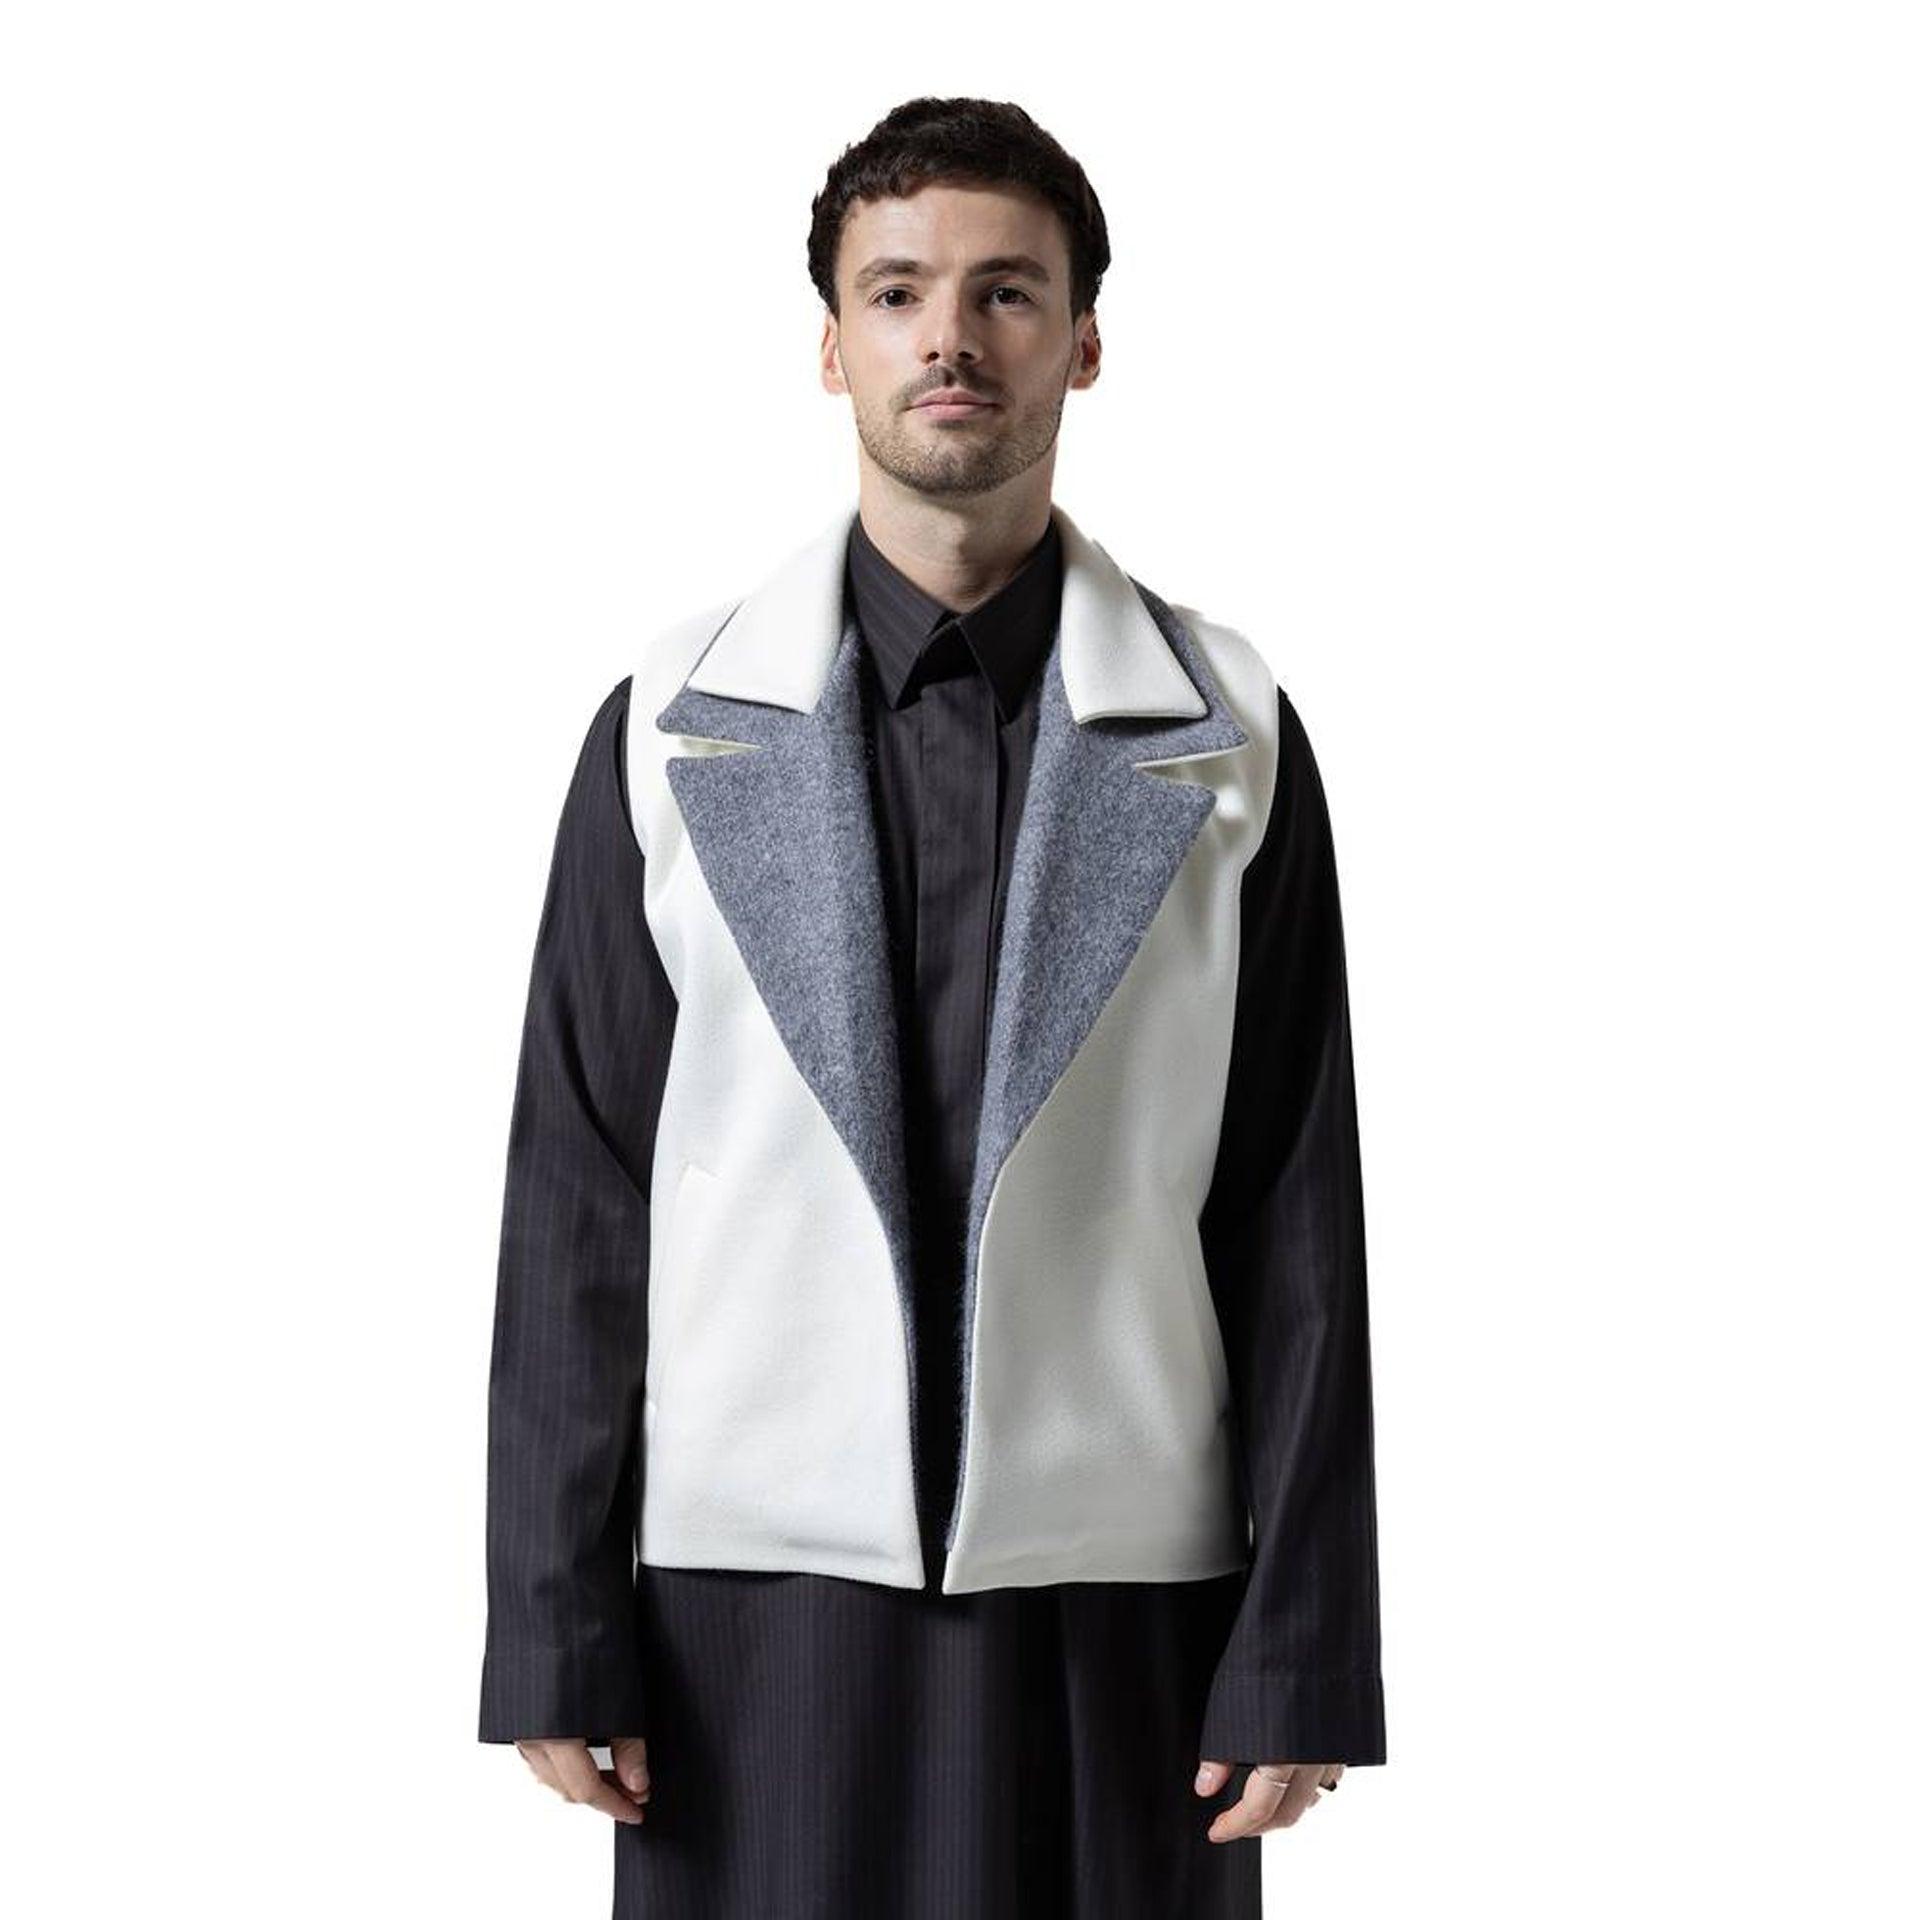 White & Gray Double Collar Vest From Hajruss - WECRE8